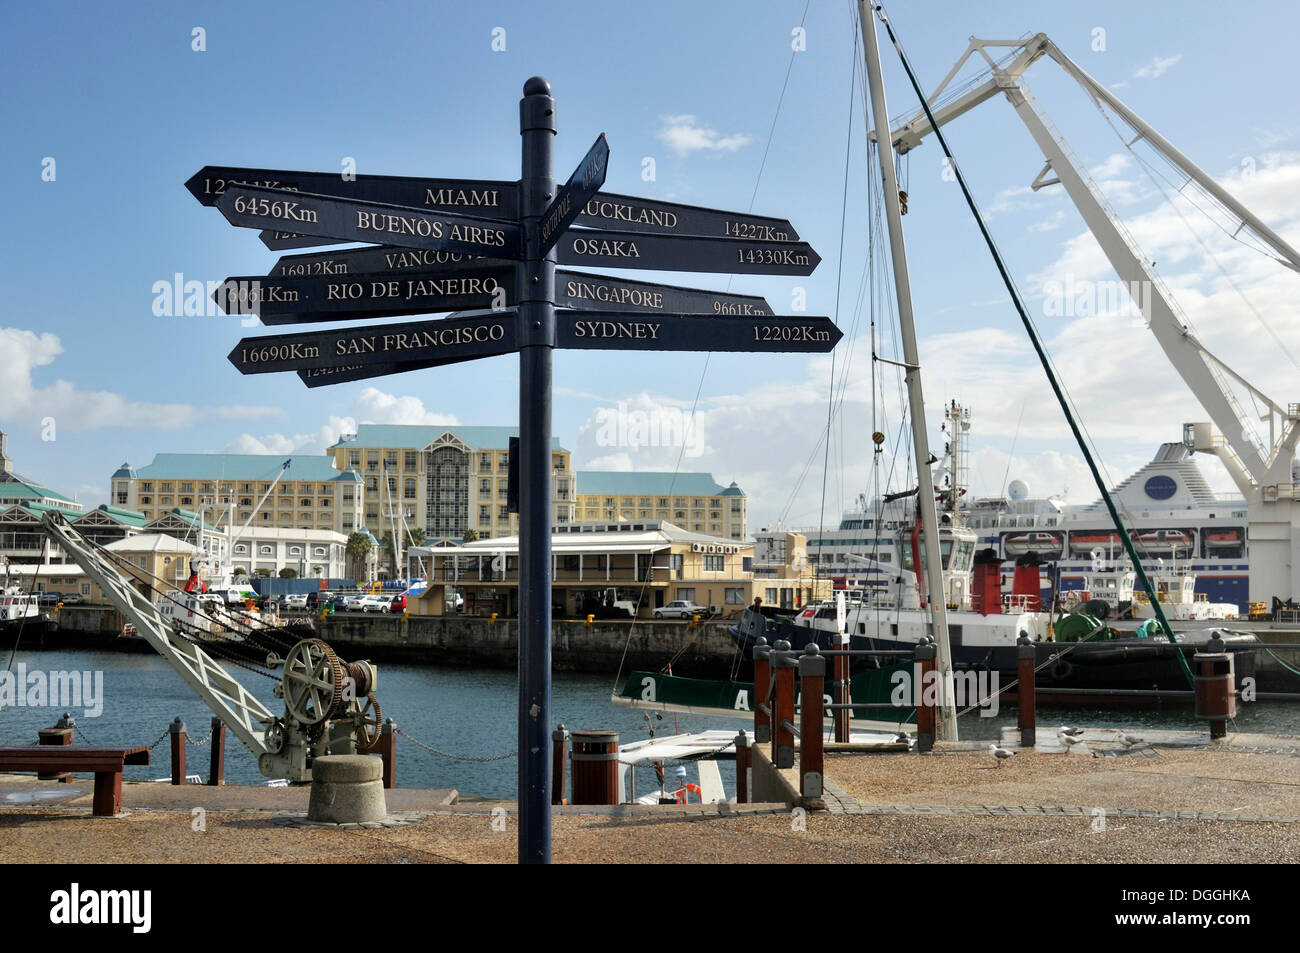 Signpost with distances to cities on different continents, Waterkant district, V & A Waterfront, Cape Town, South Africa, Africa Stock Photo